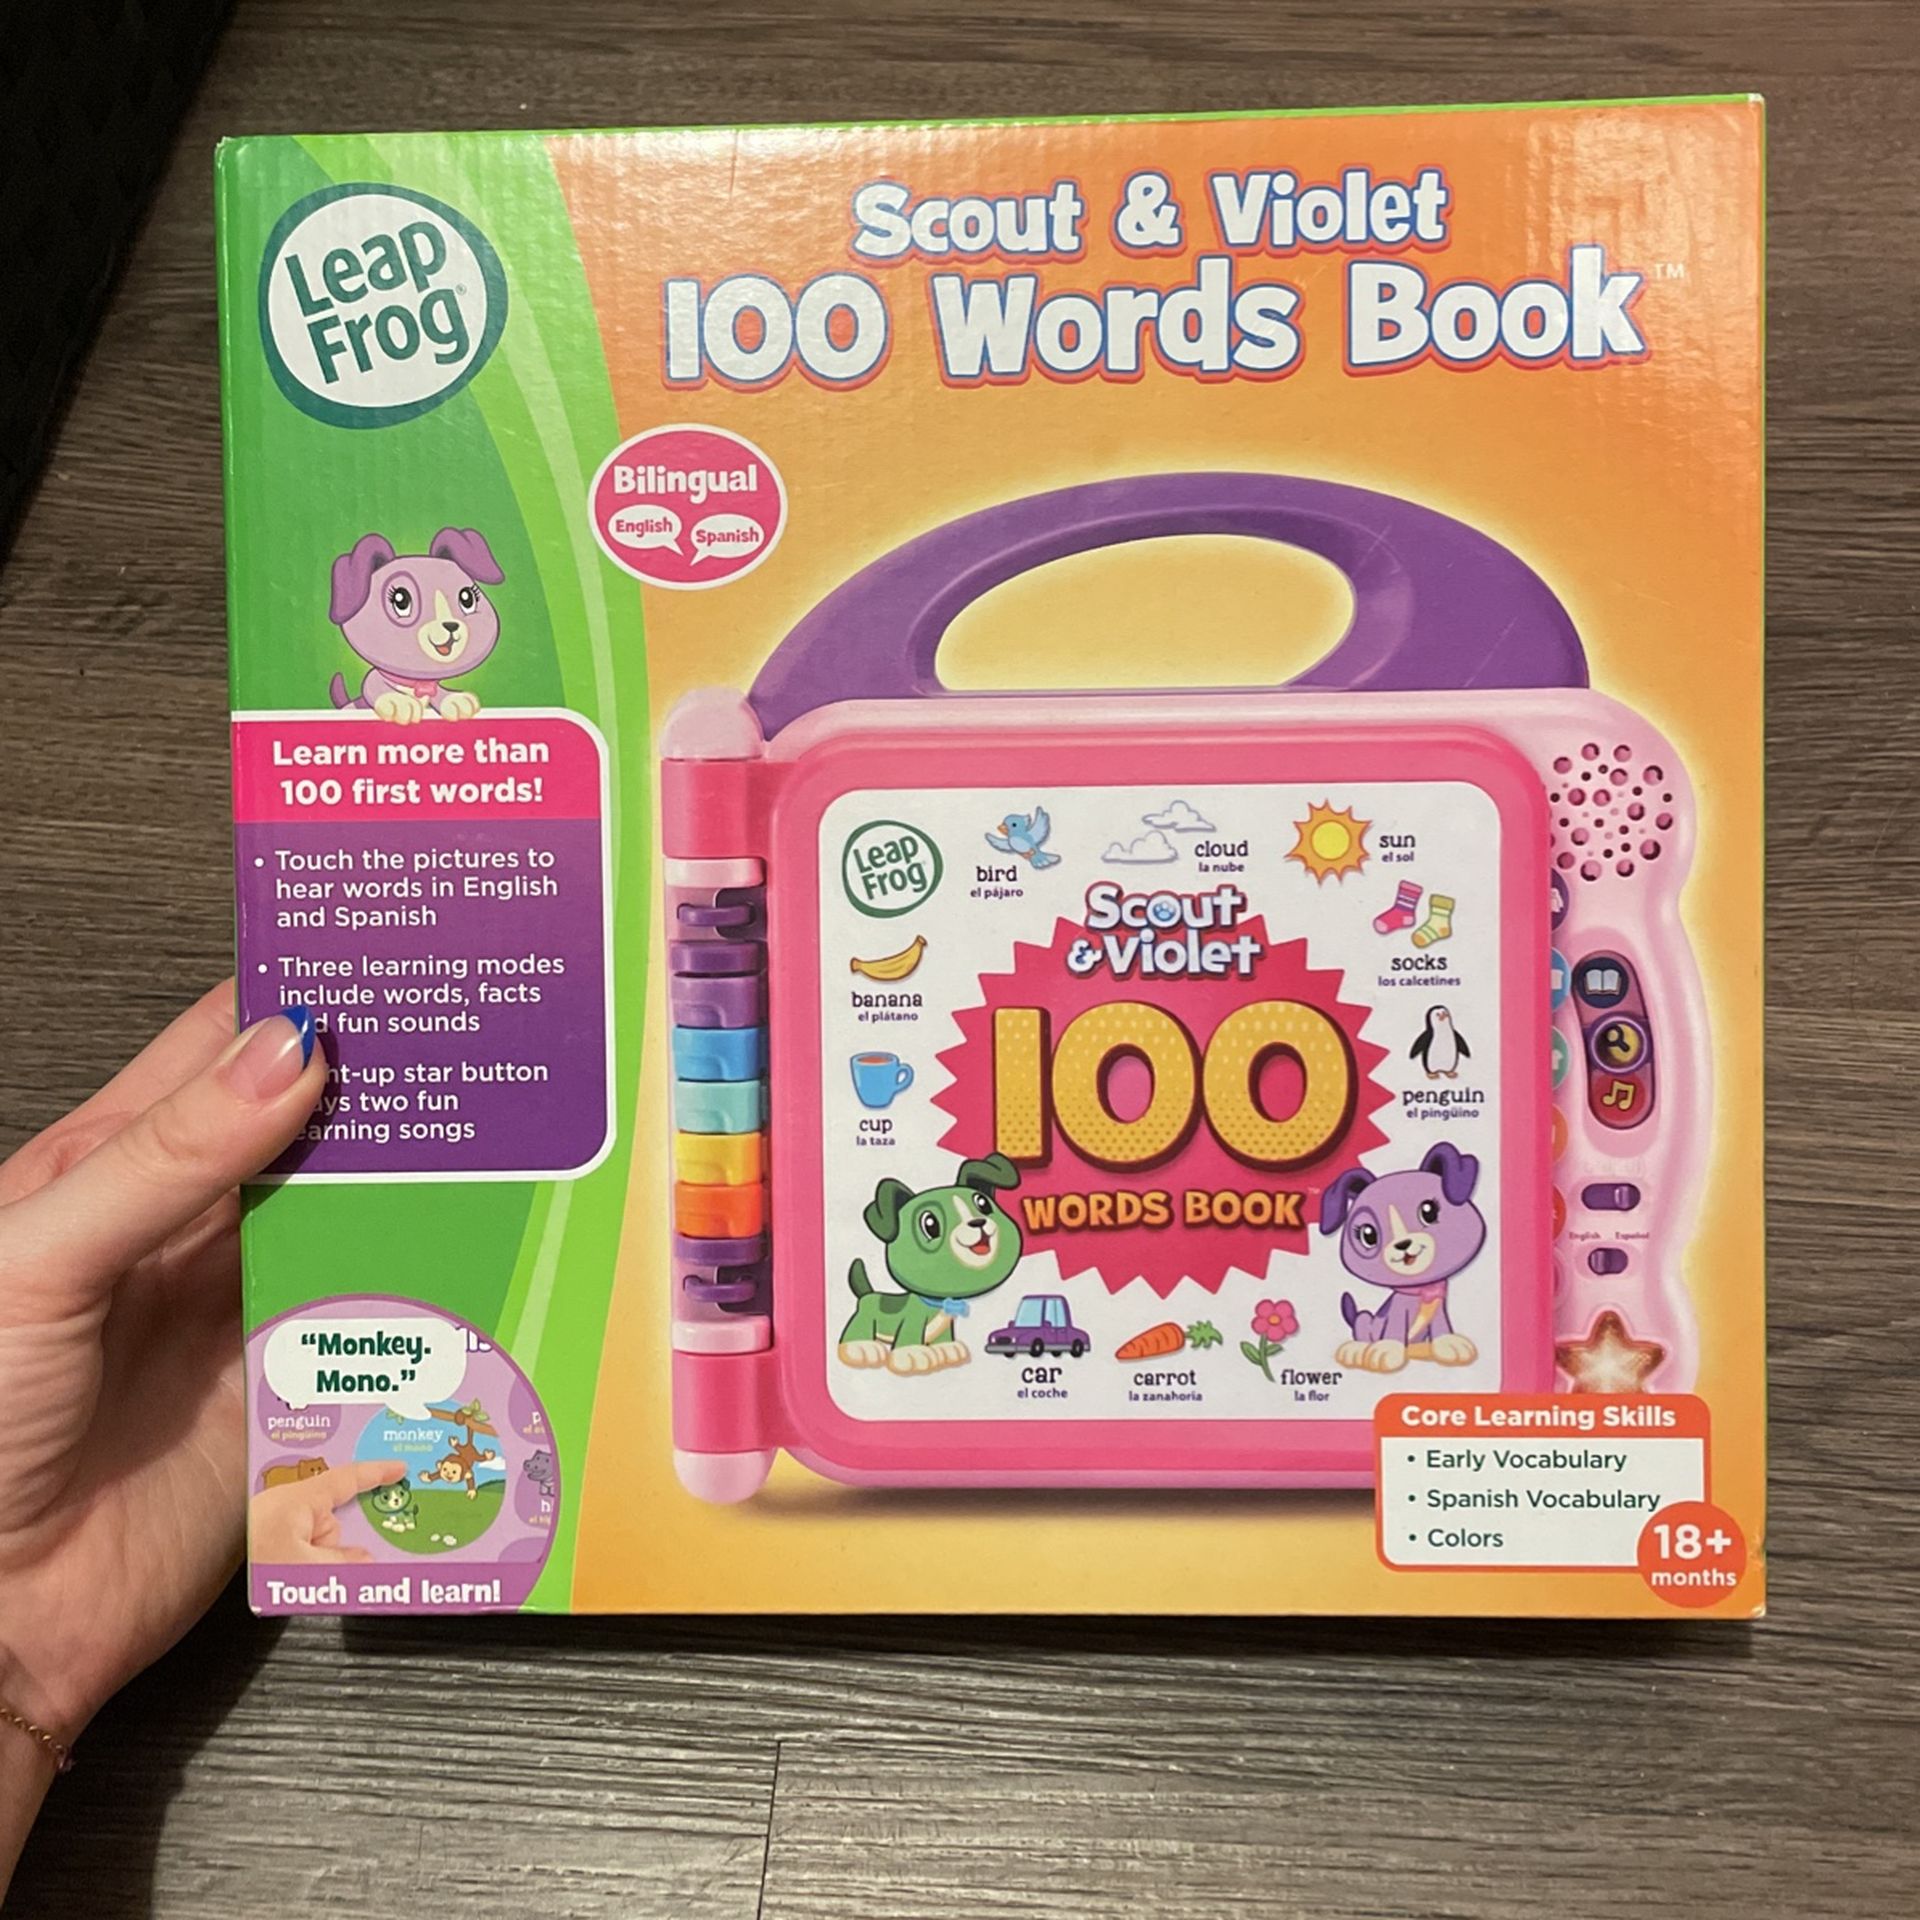 Scout & Violet 100 words book lead frog